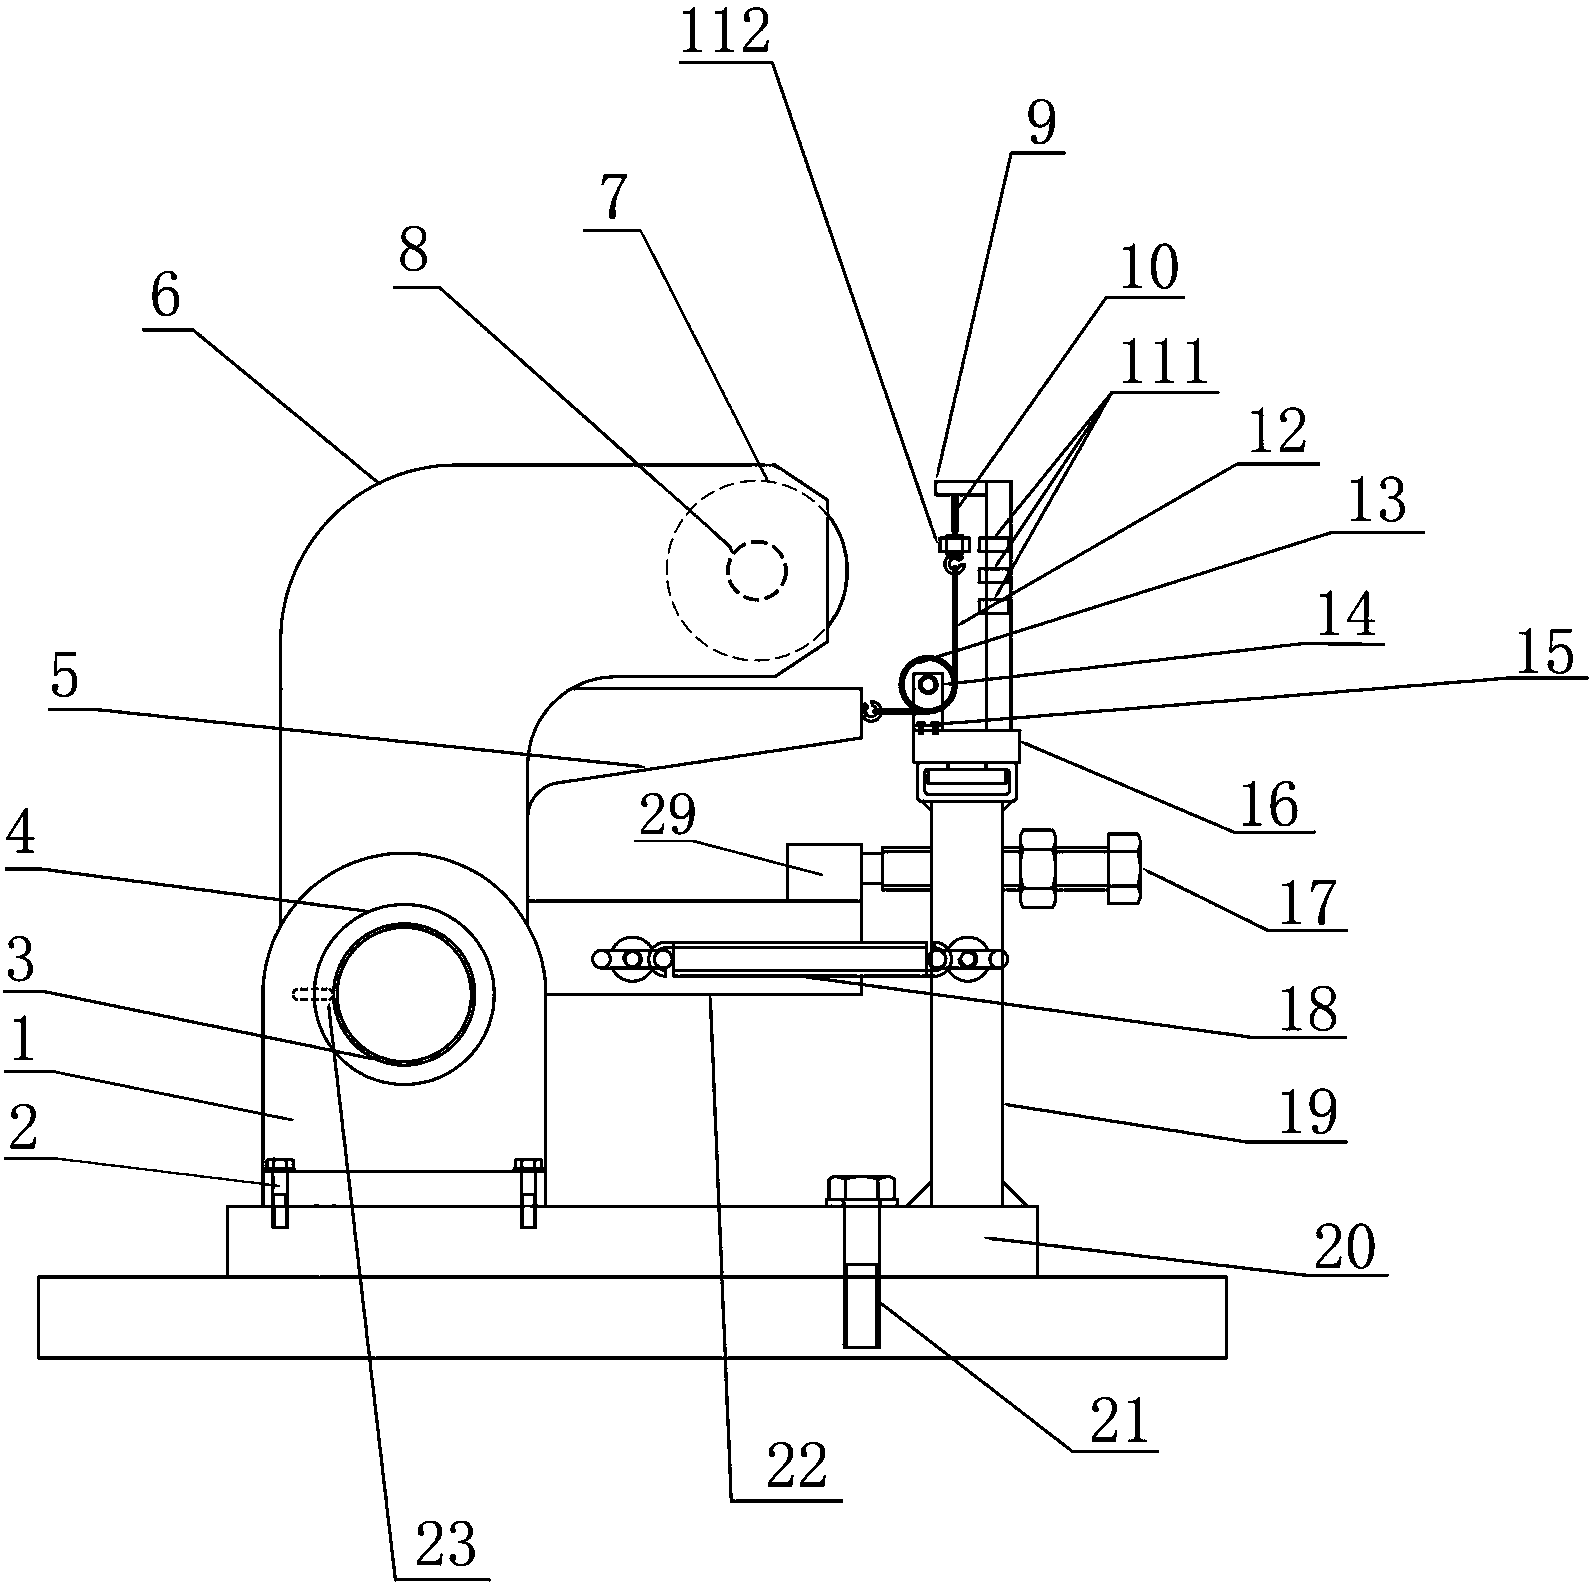 Safe monitoring device of winding engine